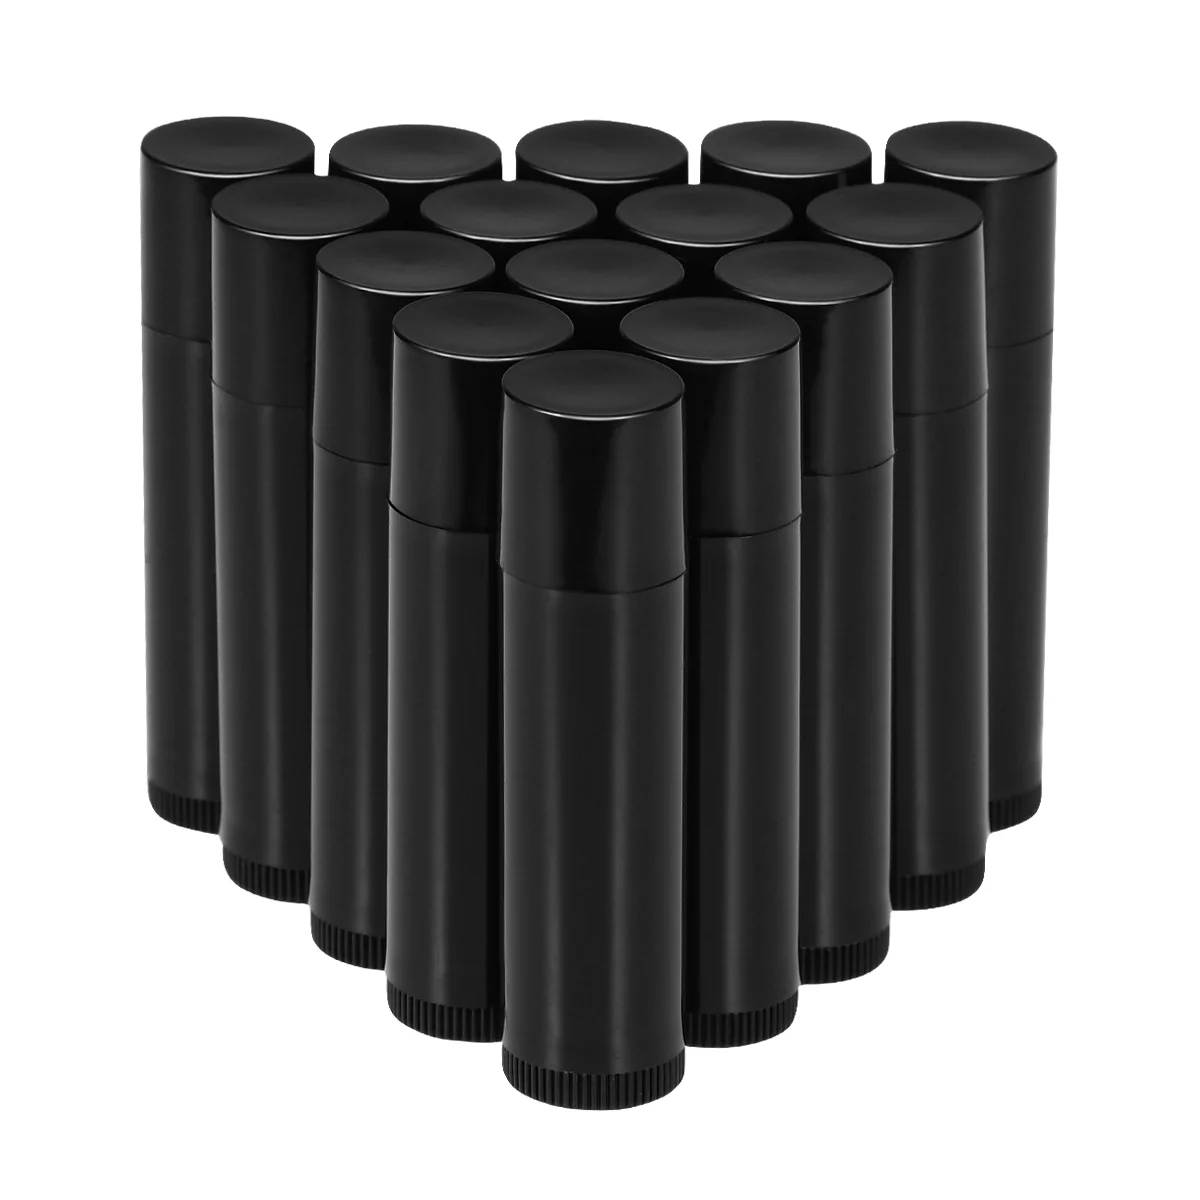 

Frcolor 25pcs 5g Empty Plastic Lip Balm Tubes Containers Lip Gloss Storage Container (Black)